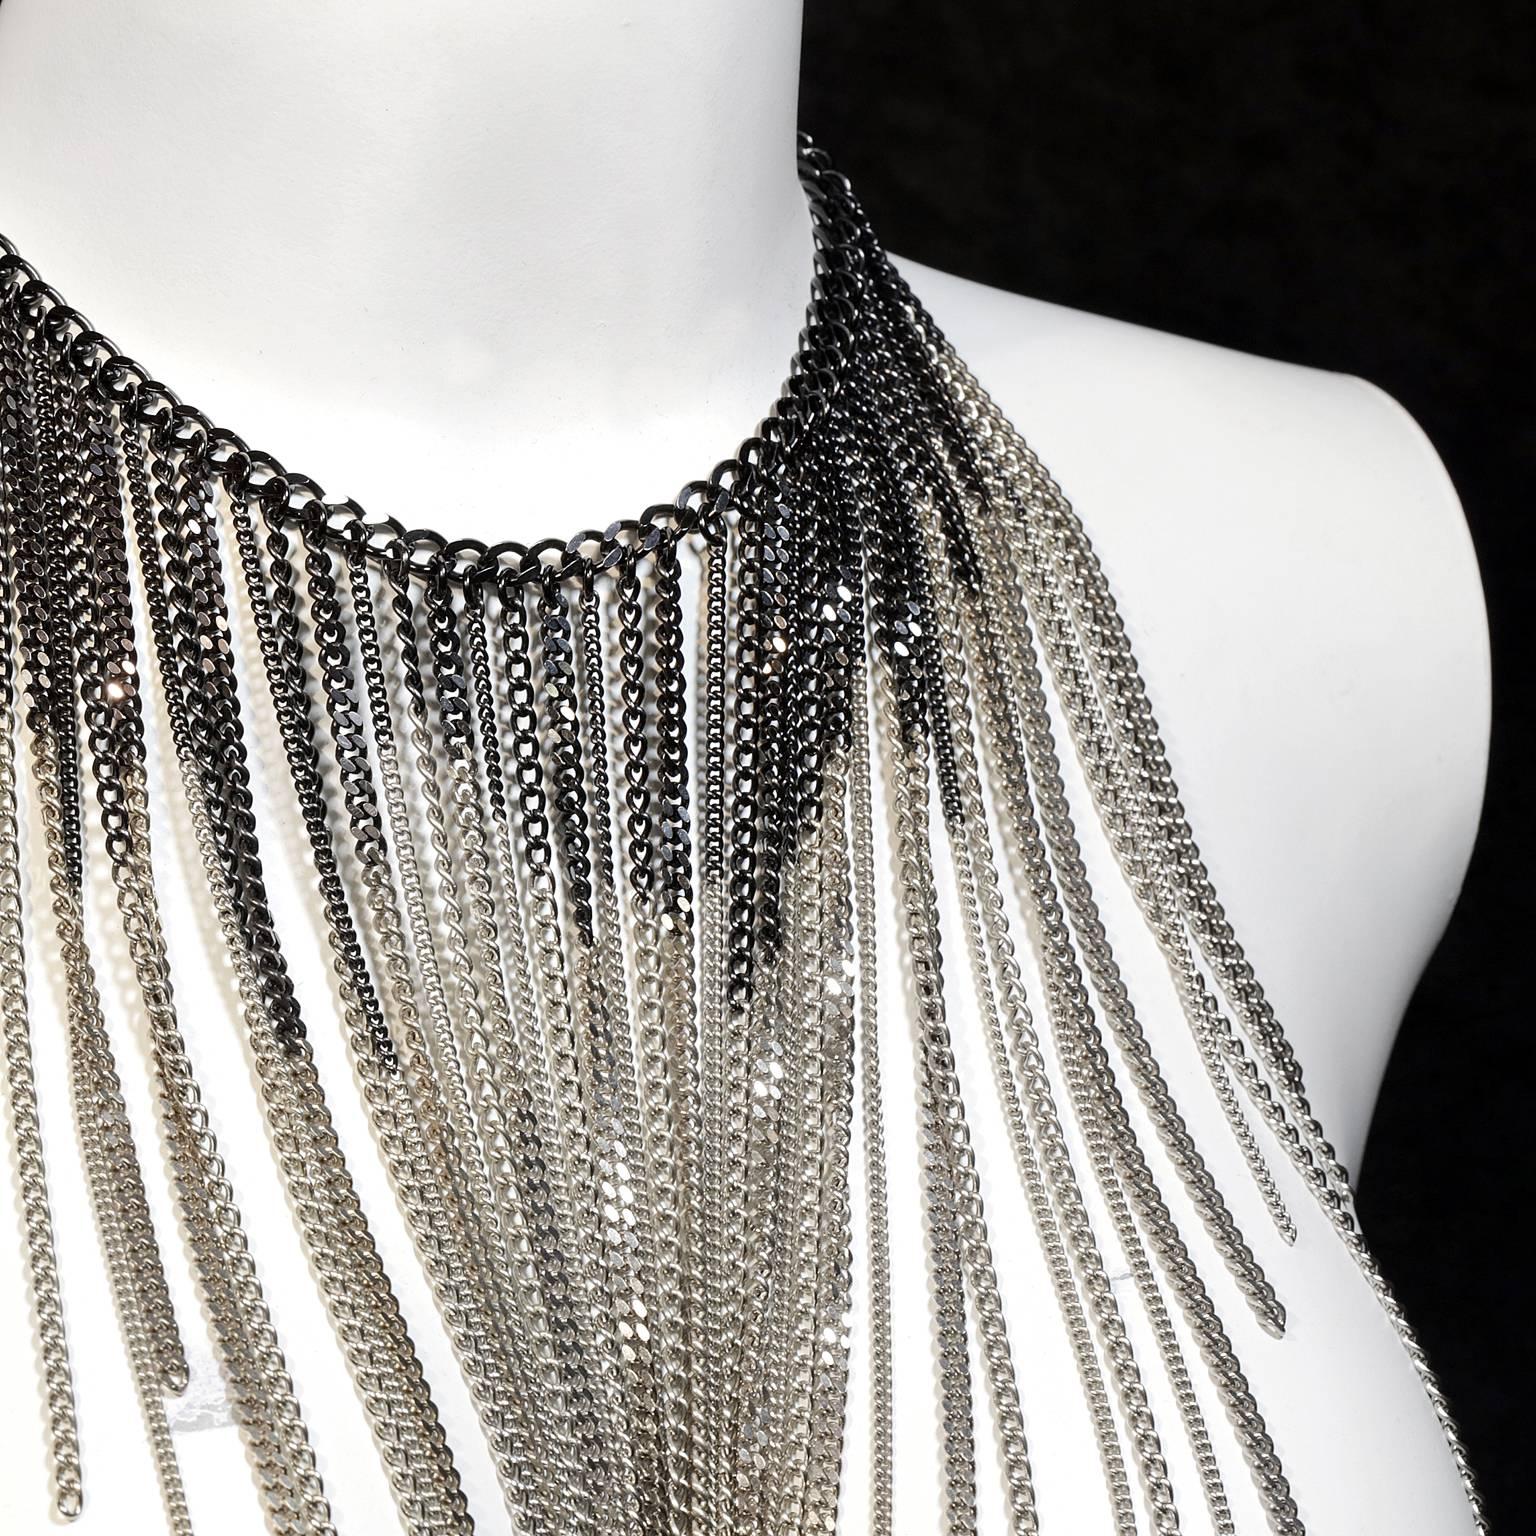 Chanel Multi Chain Bib Necklace- PRISTINE
  Dripping chains in ruthenium and gold make a definite statement. 
Edgy ruthenium and gold chains hang at differing lengths creating a dramatic visage.  Adjustable length.  Lobster claw closure.  
